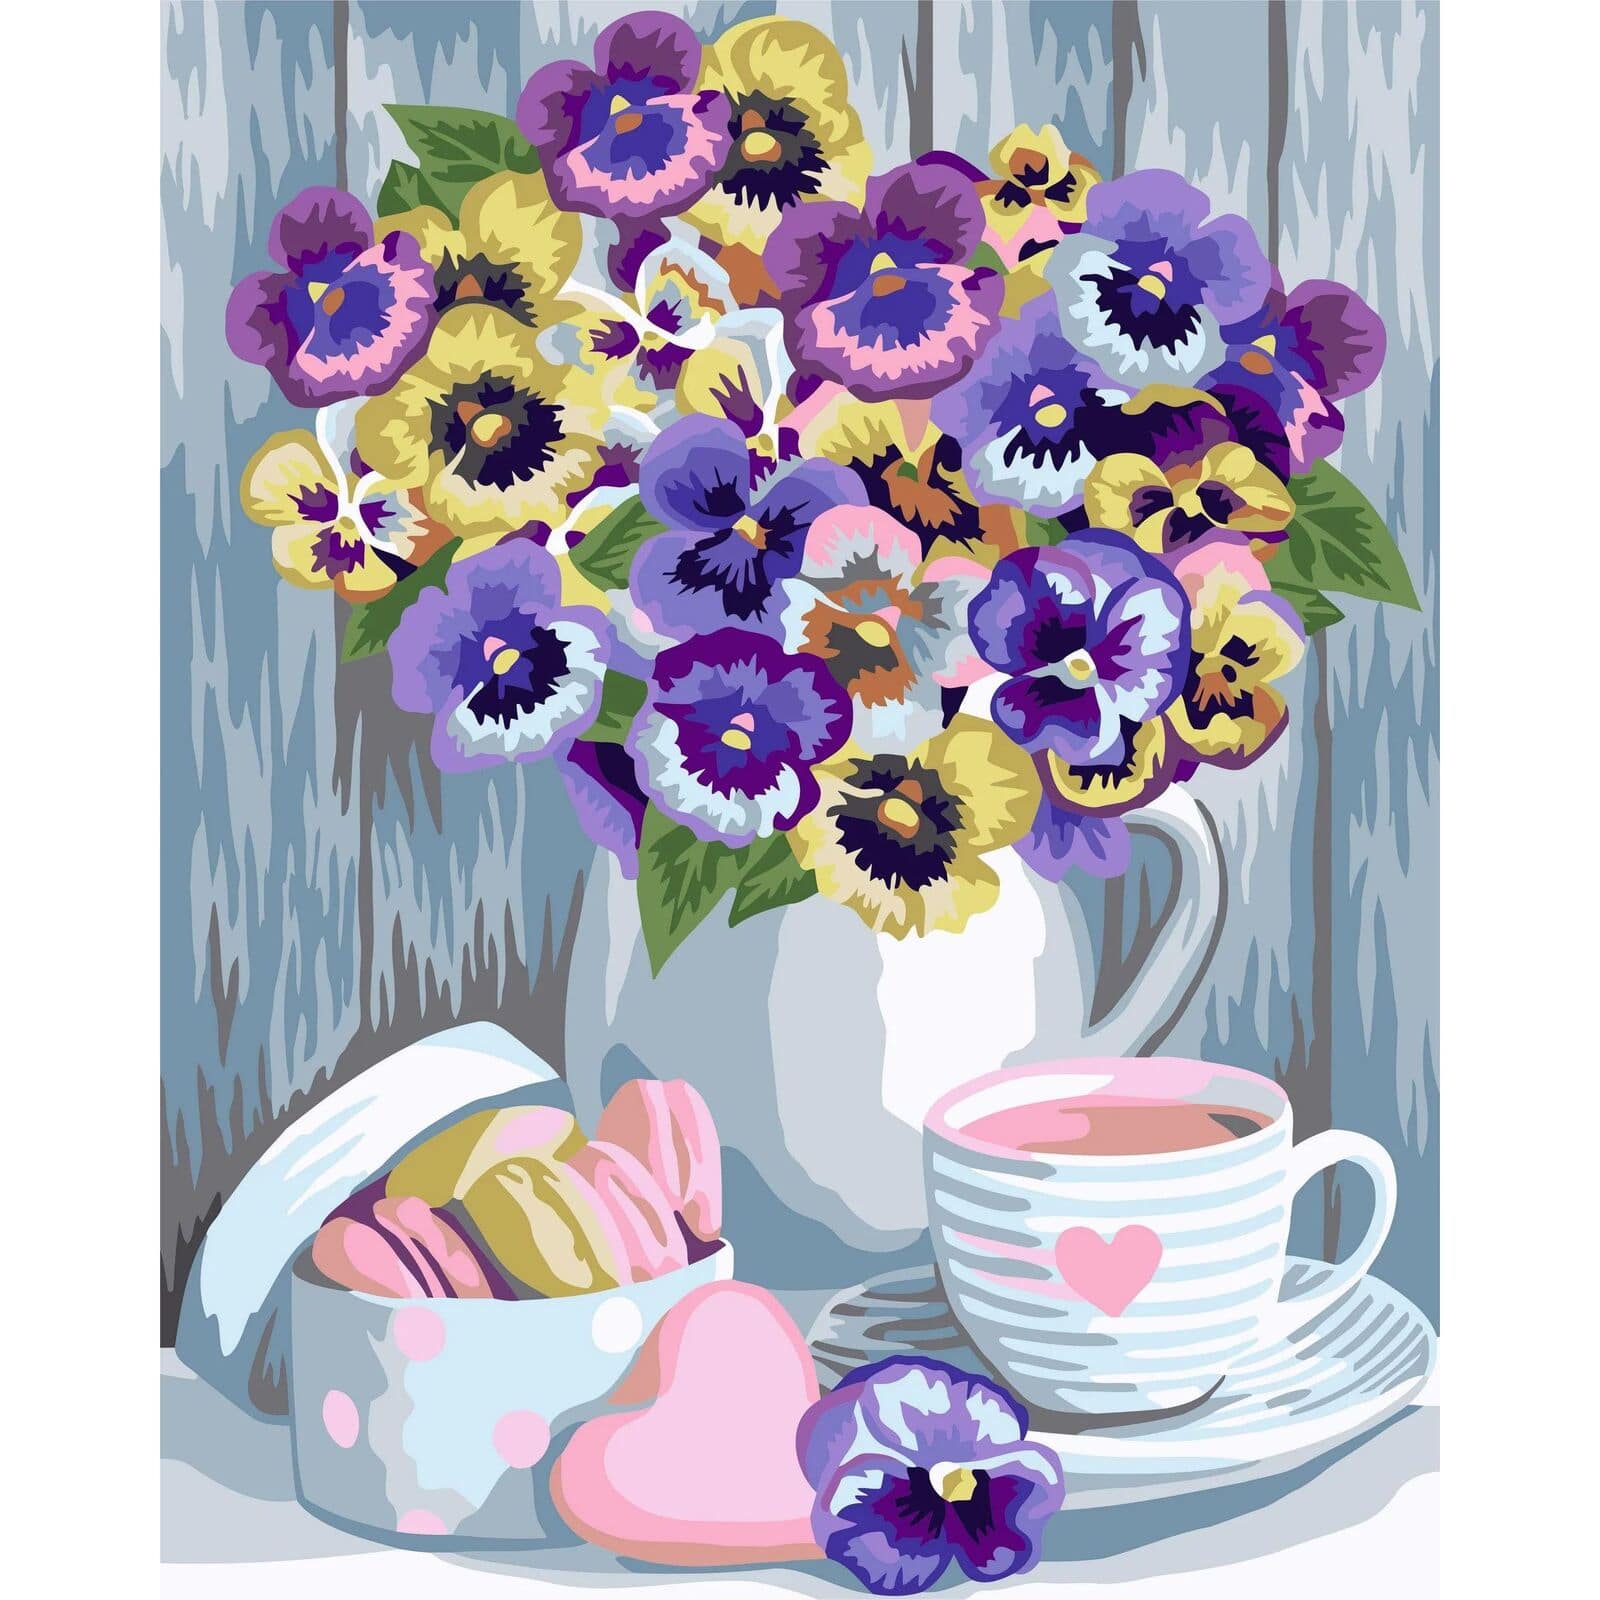 Crafting Spark Violets Painting by Numbers Kit